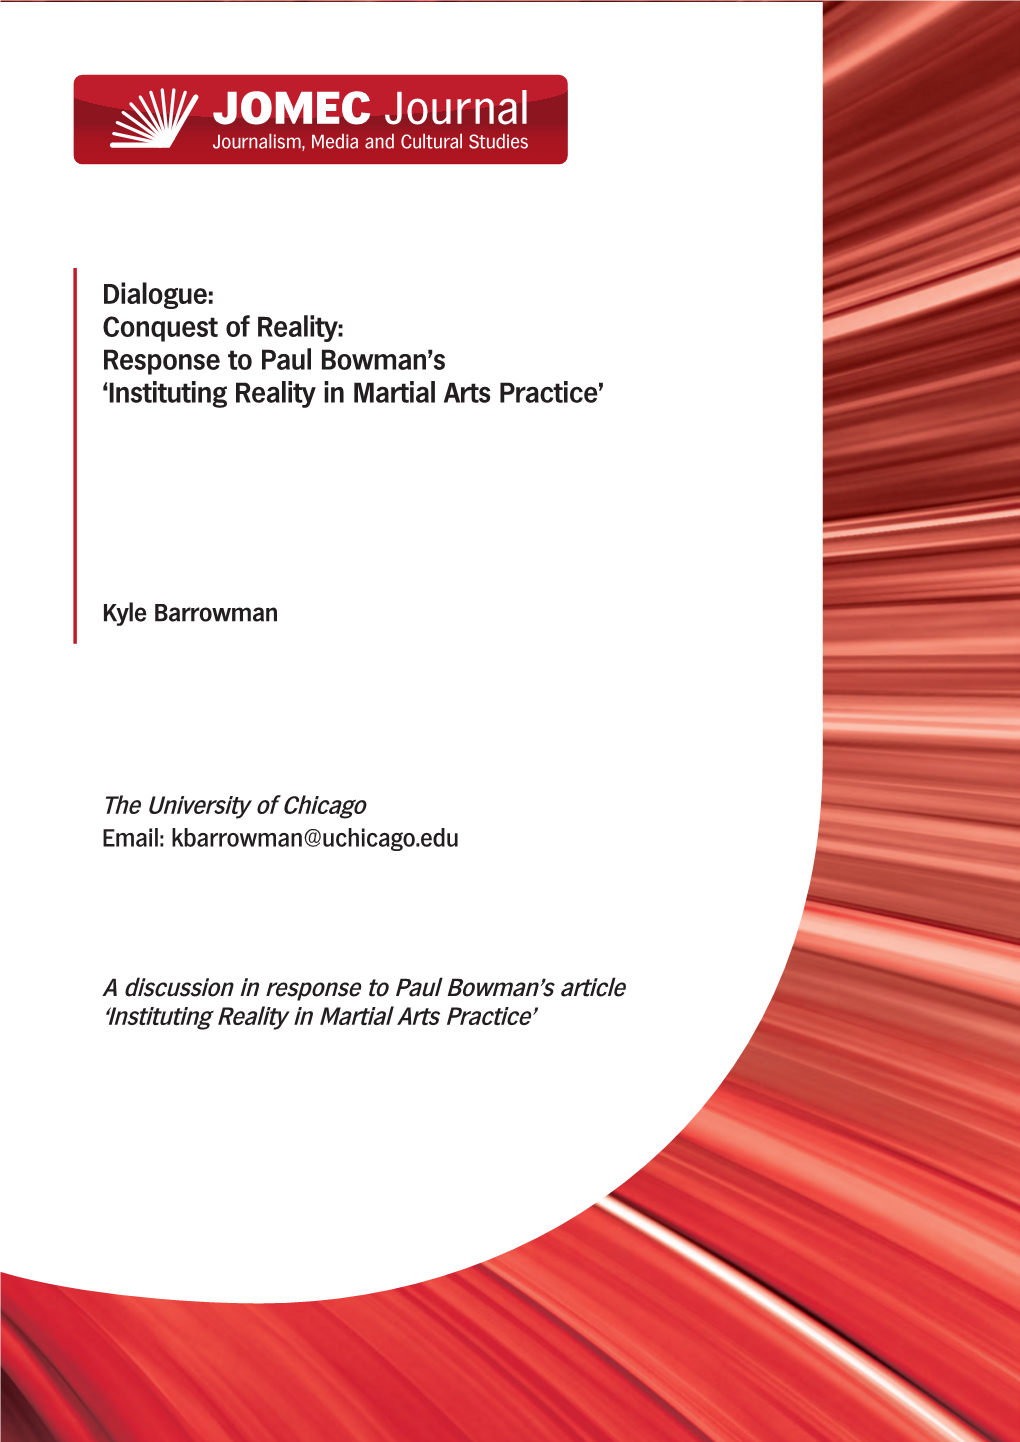 Response to Paul Bowman's Article ‘Instituting Reality in Martial Arts Practice' Abstract